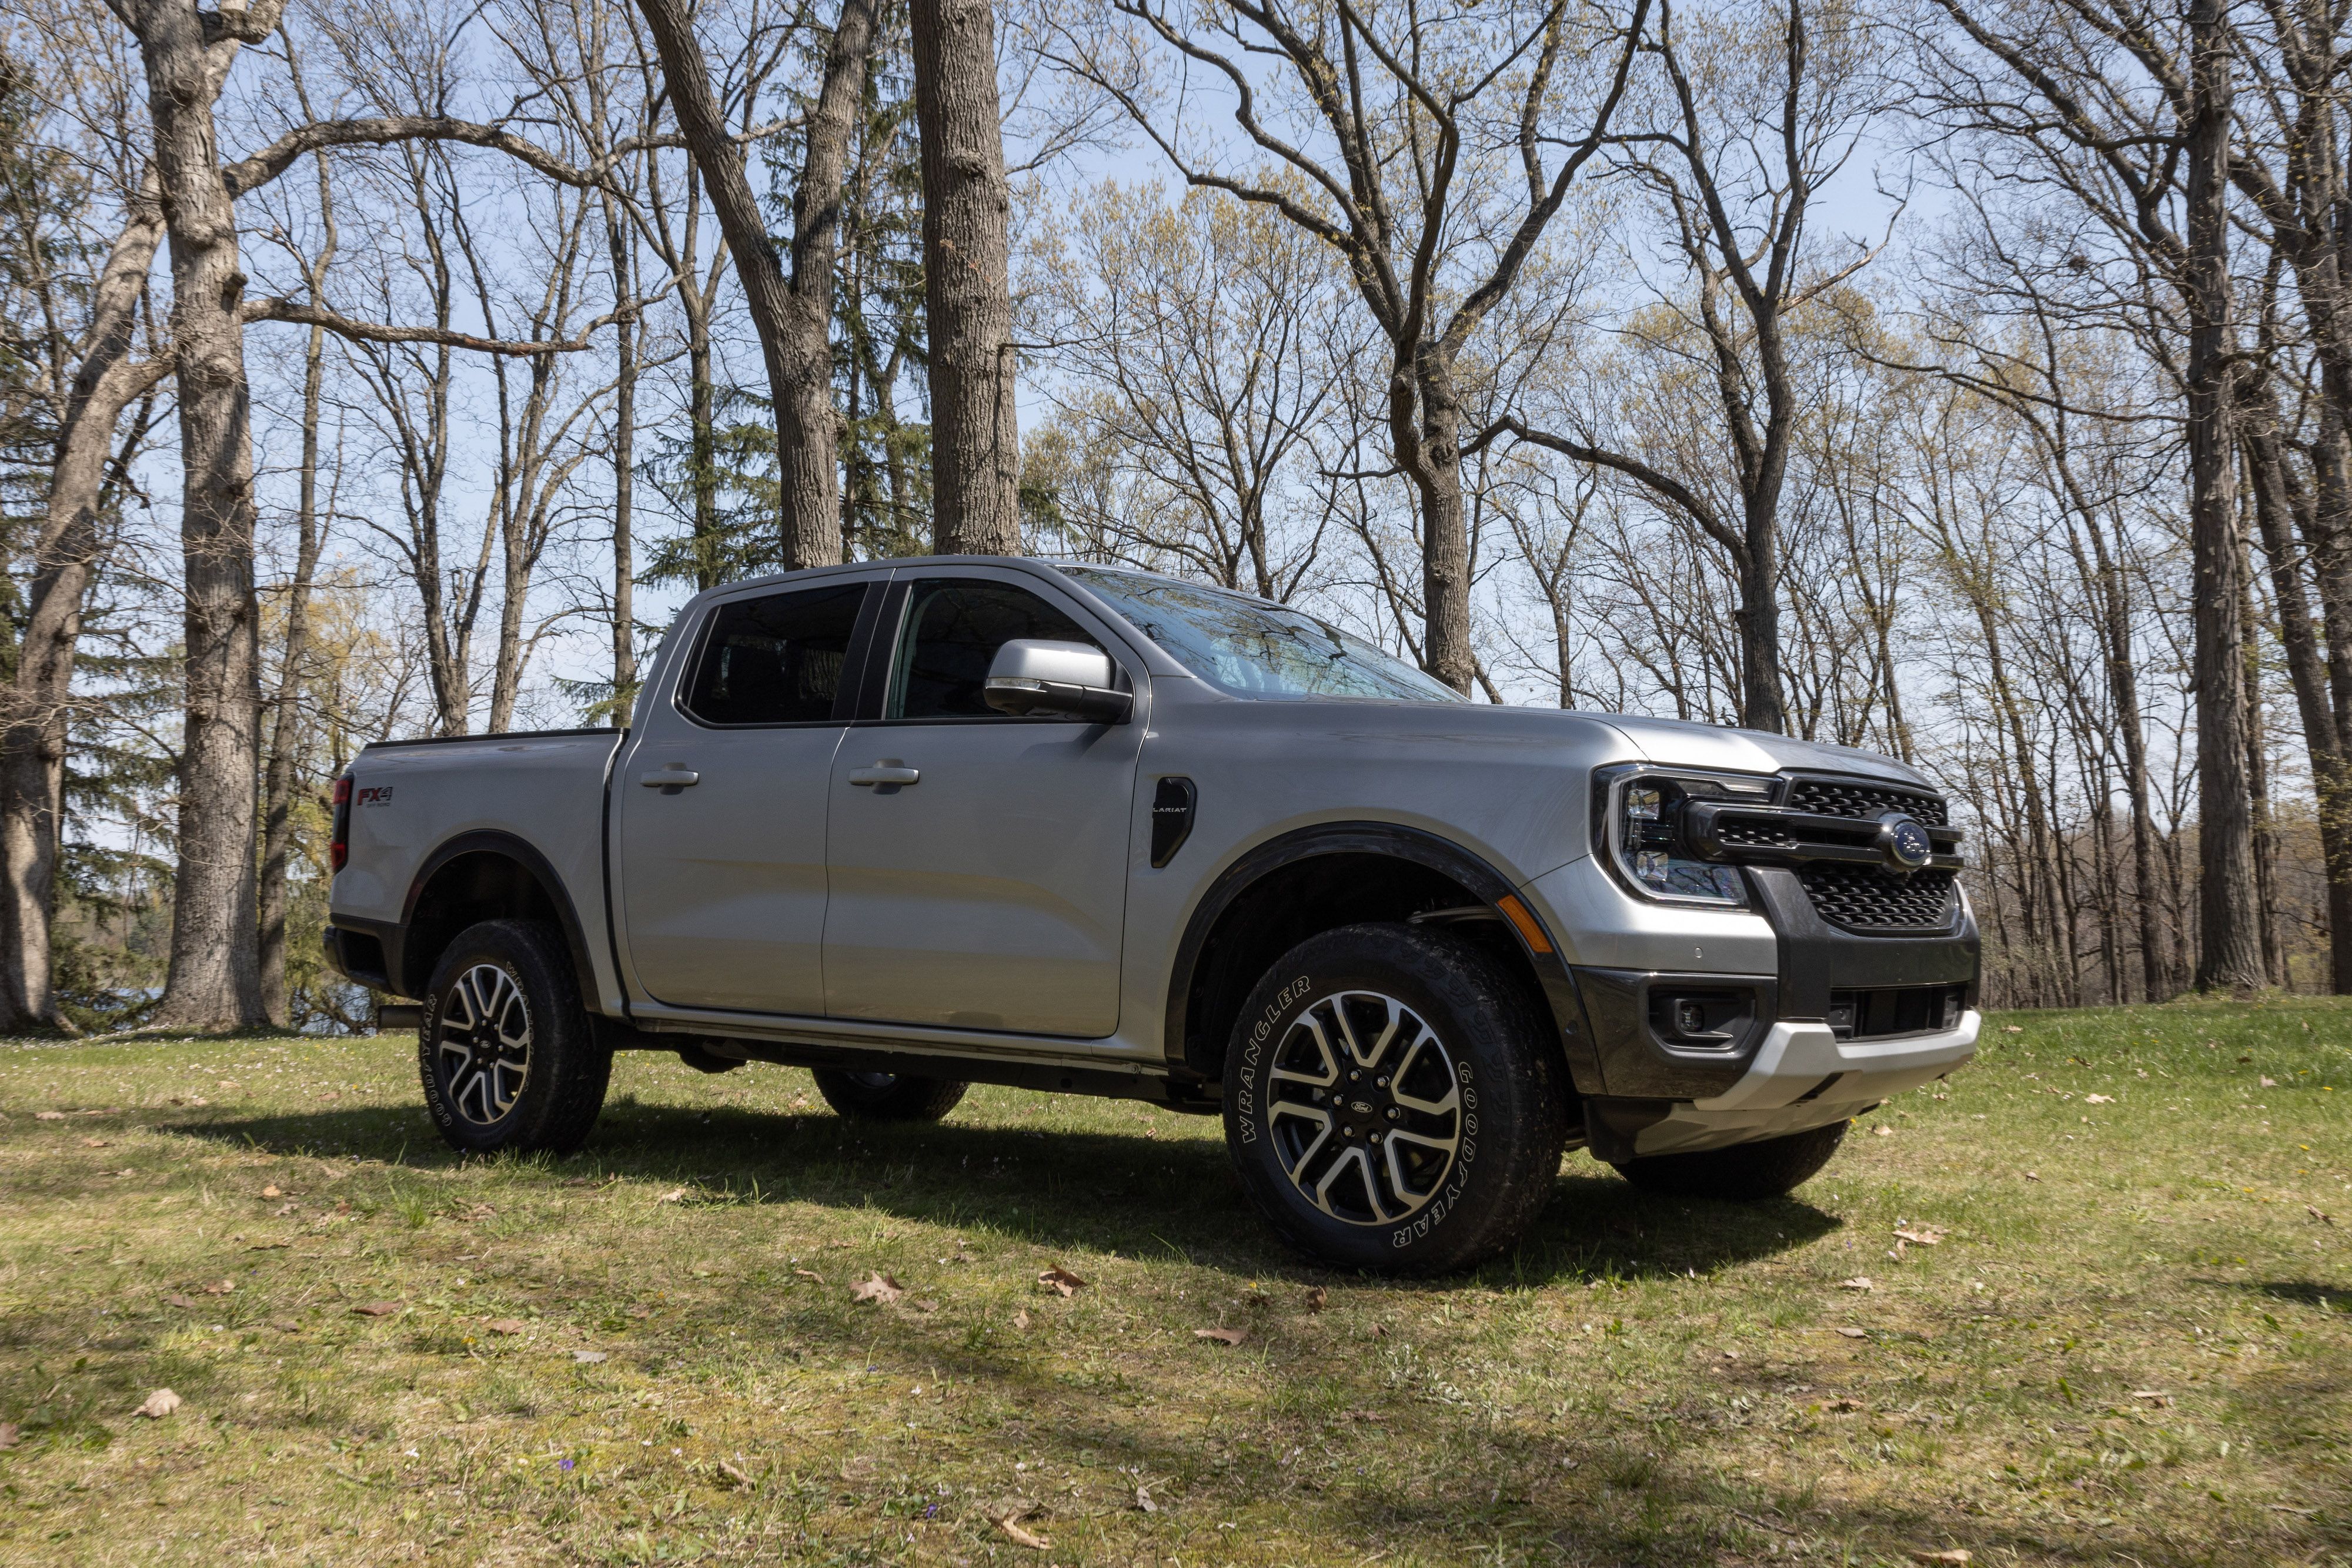 Opinion: The Ford Ranger is a 'car', whether you like it or not